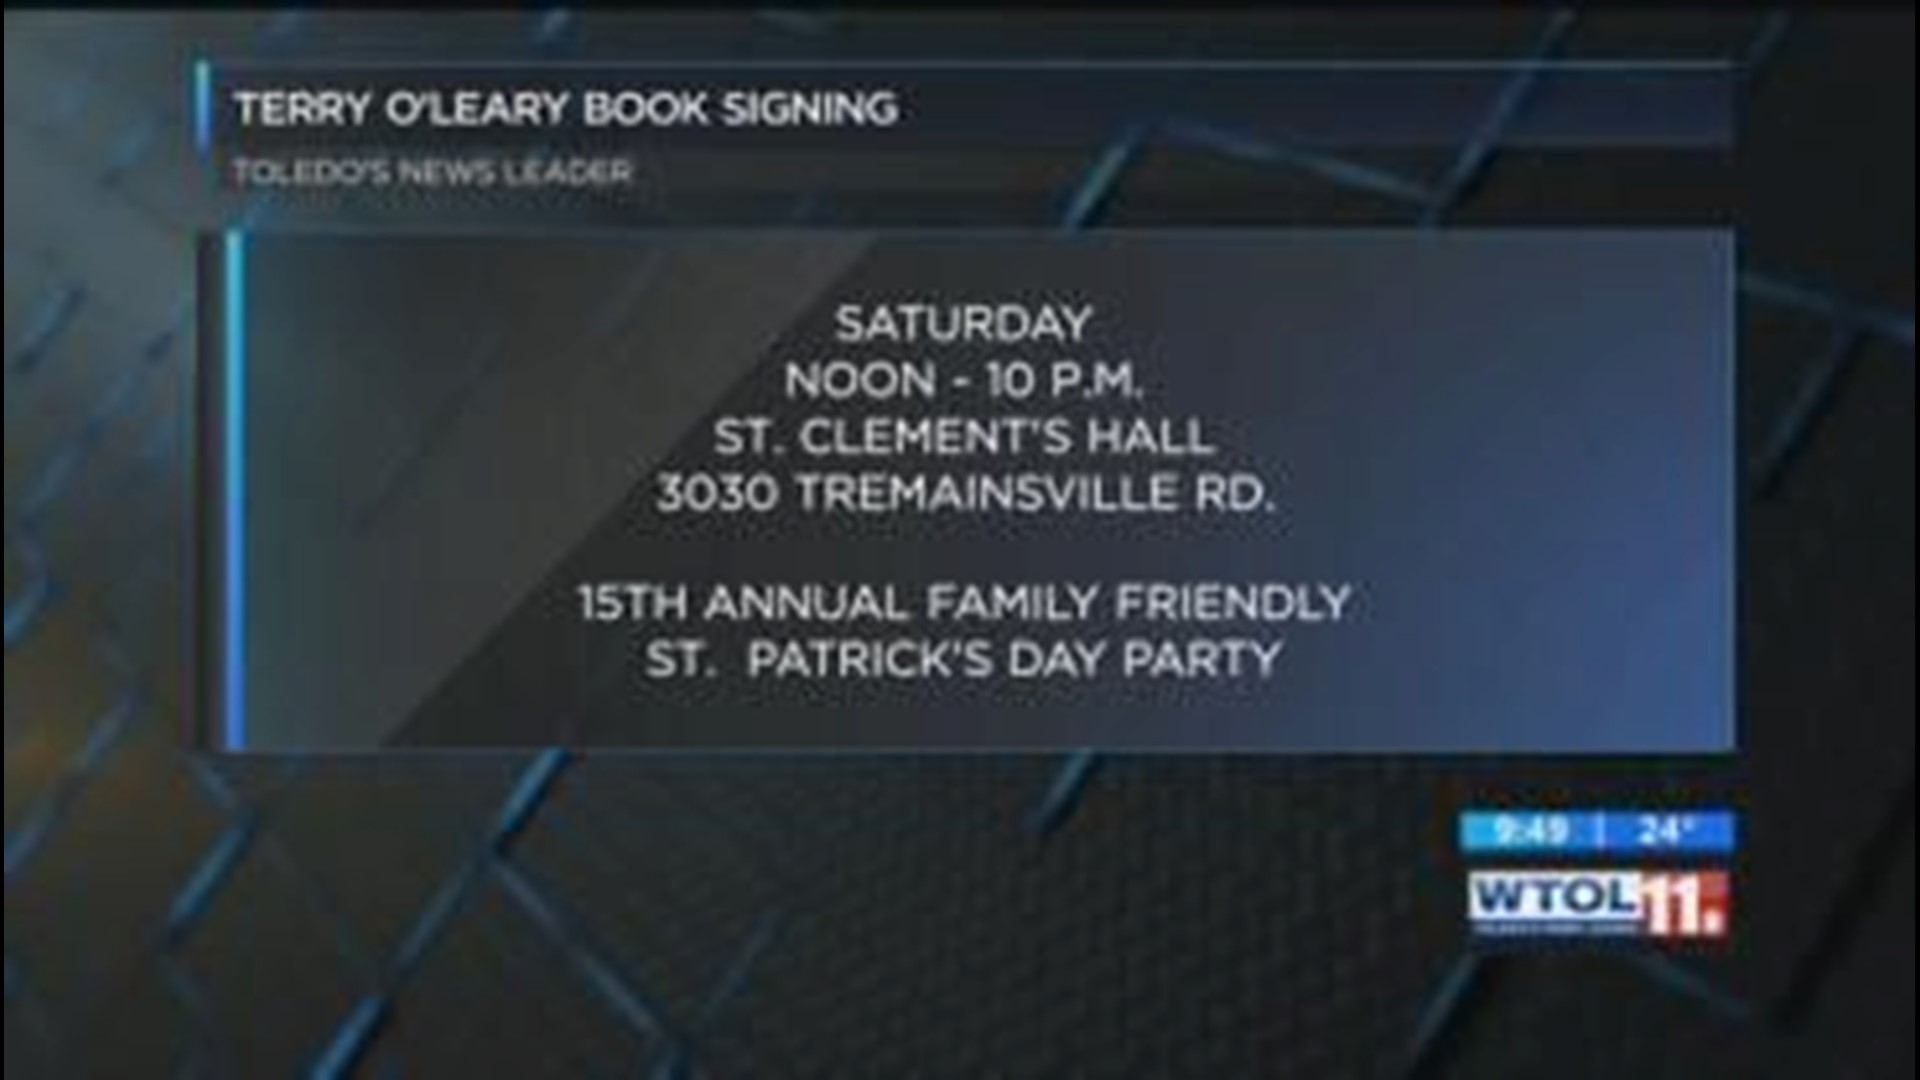 See local author Terry O'Leary at his book signing